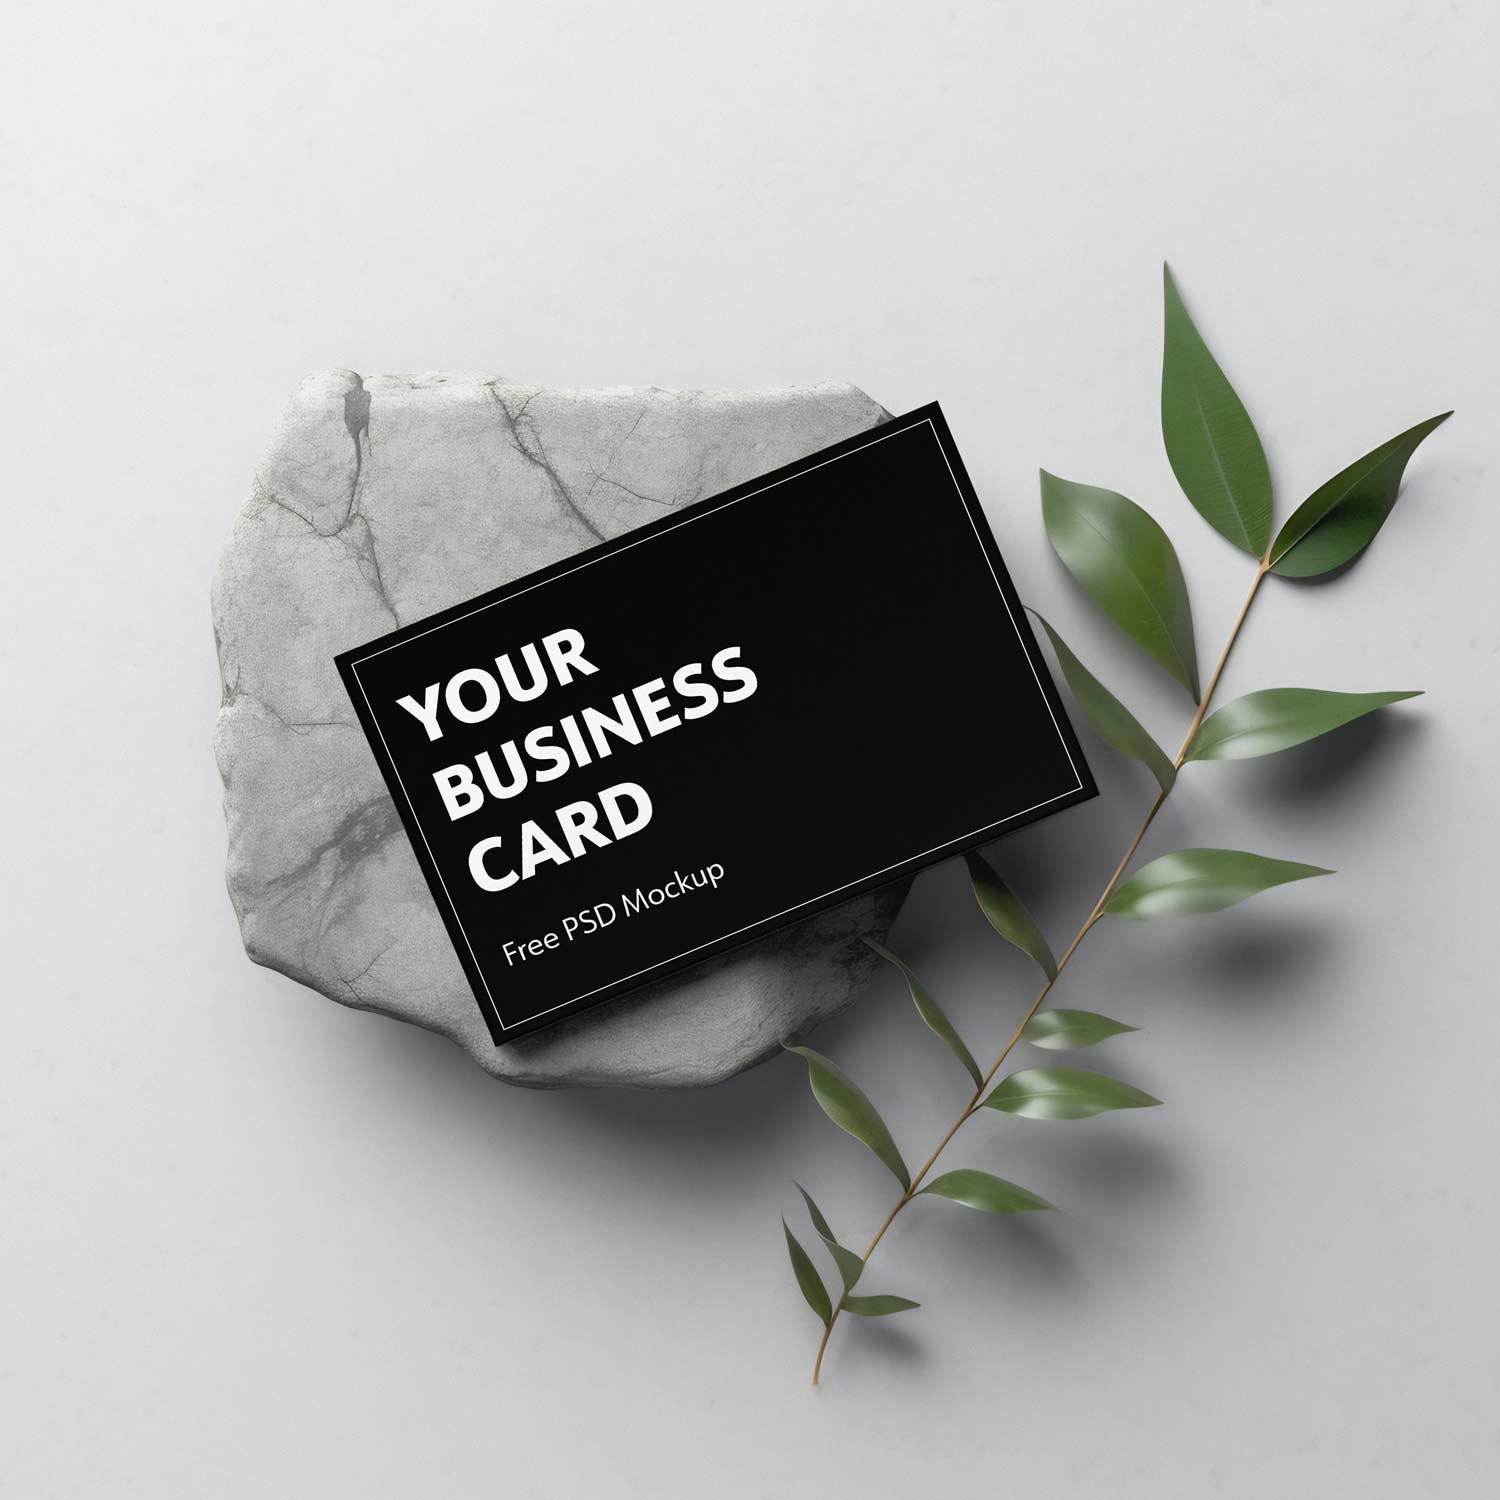 free mockup of a black business card (standard EU size) on a stone and a branch